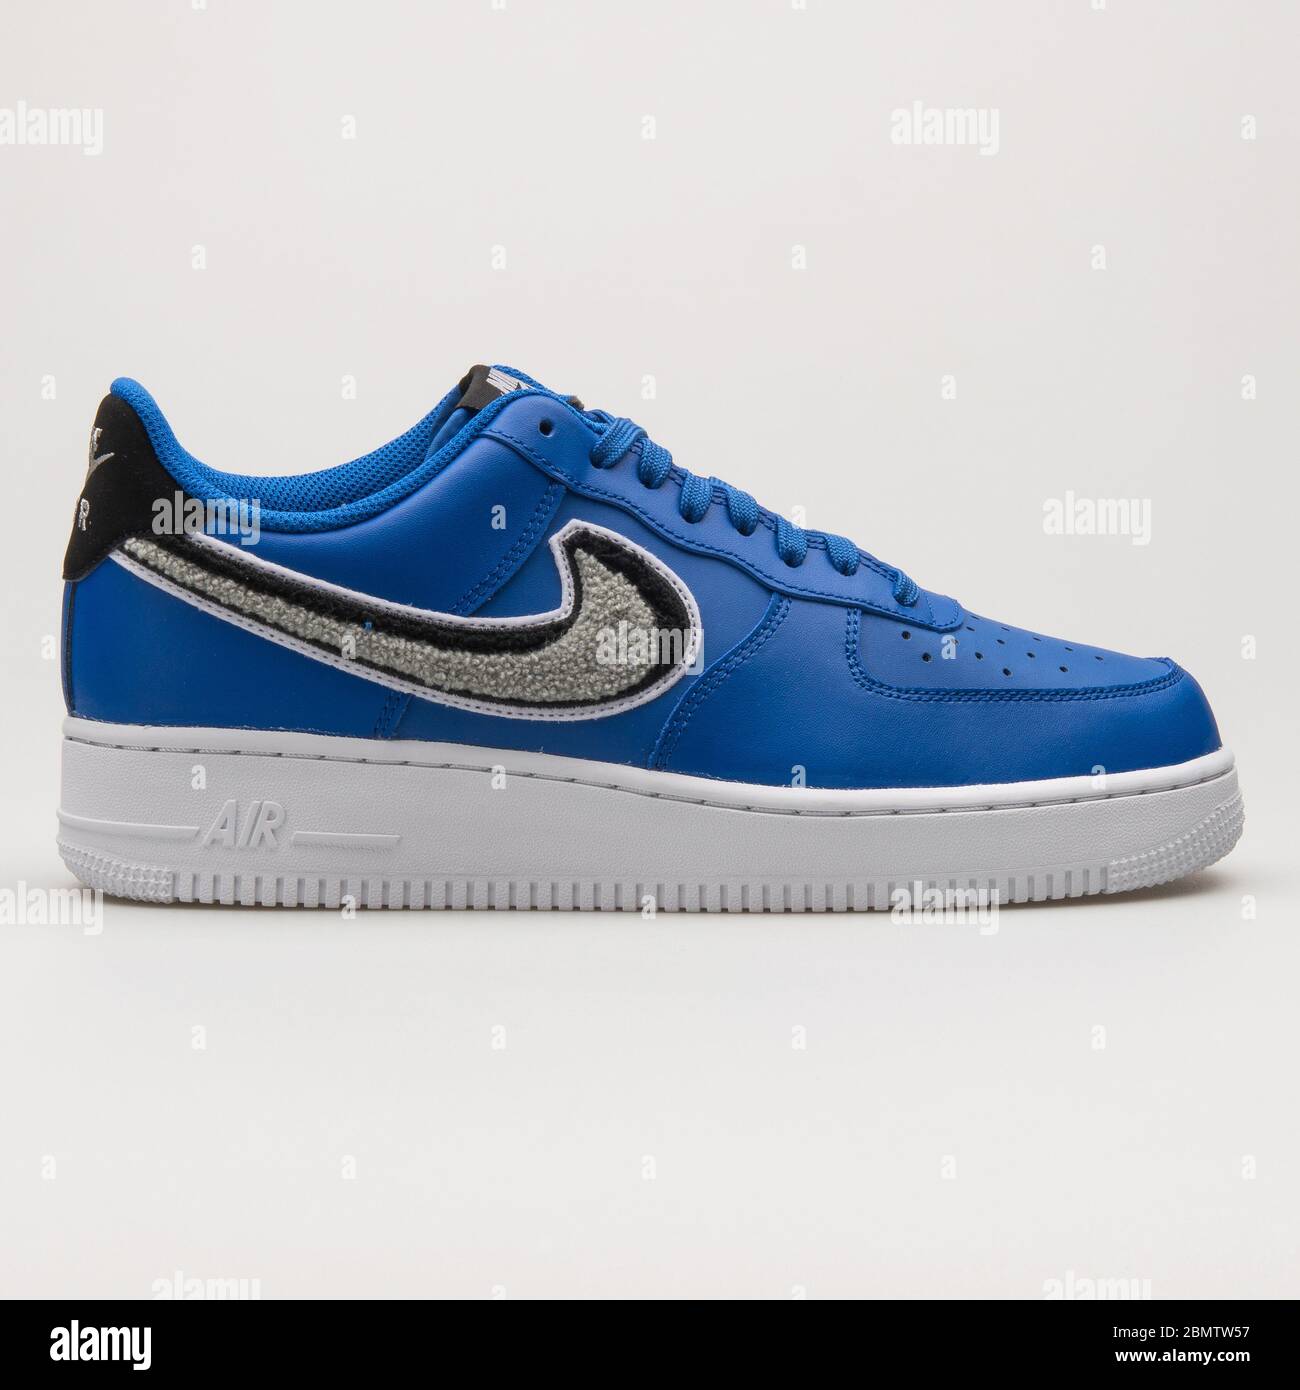 VIENNA, AUSTRIA - JUNE 14, 2018: Nike Air Force 1 07 LV8 blue, grey, black and white sneaker on white background. Stock Photo